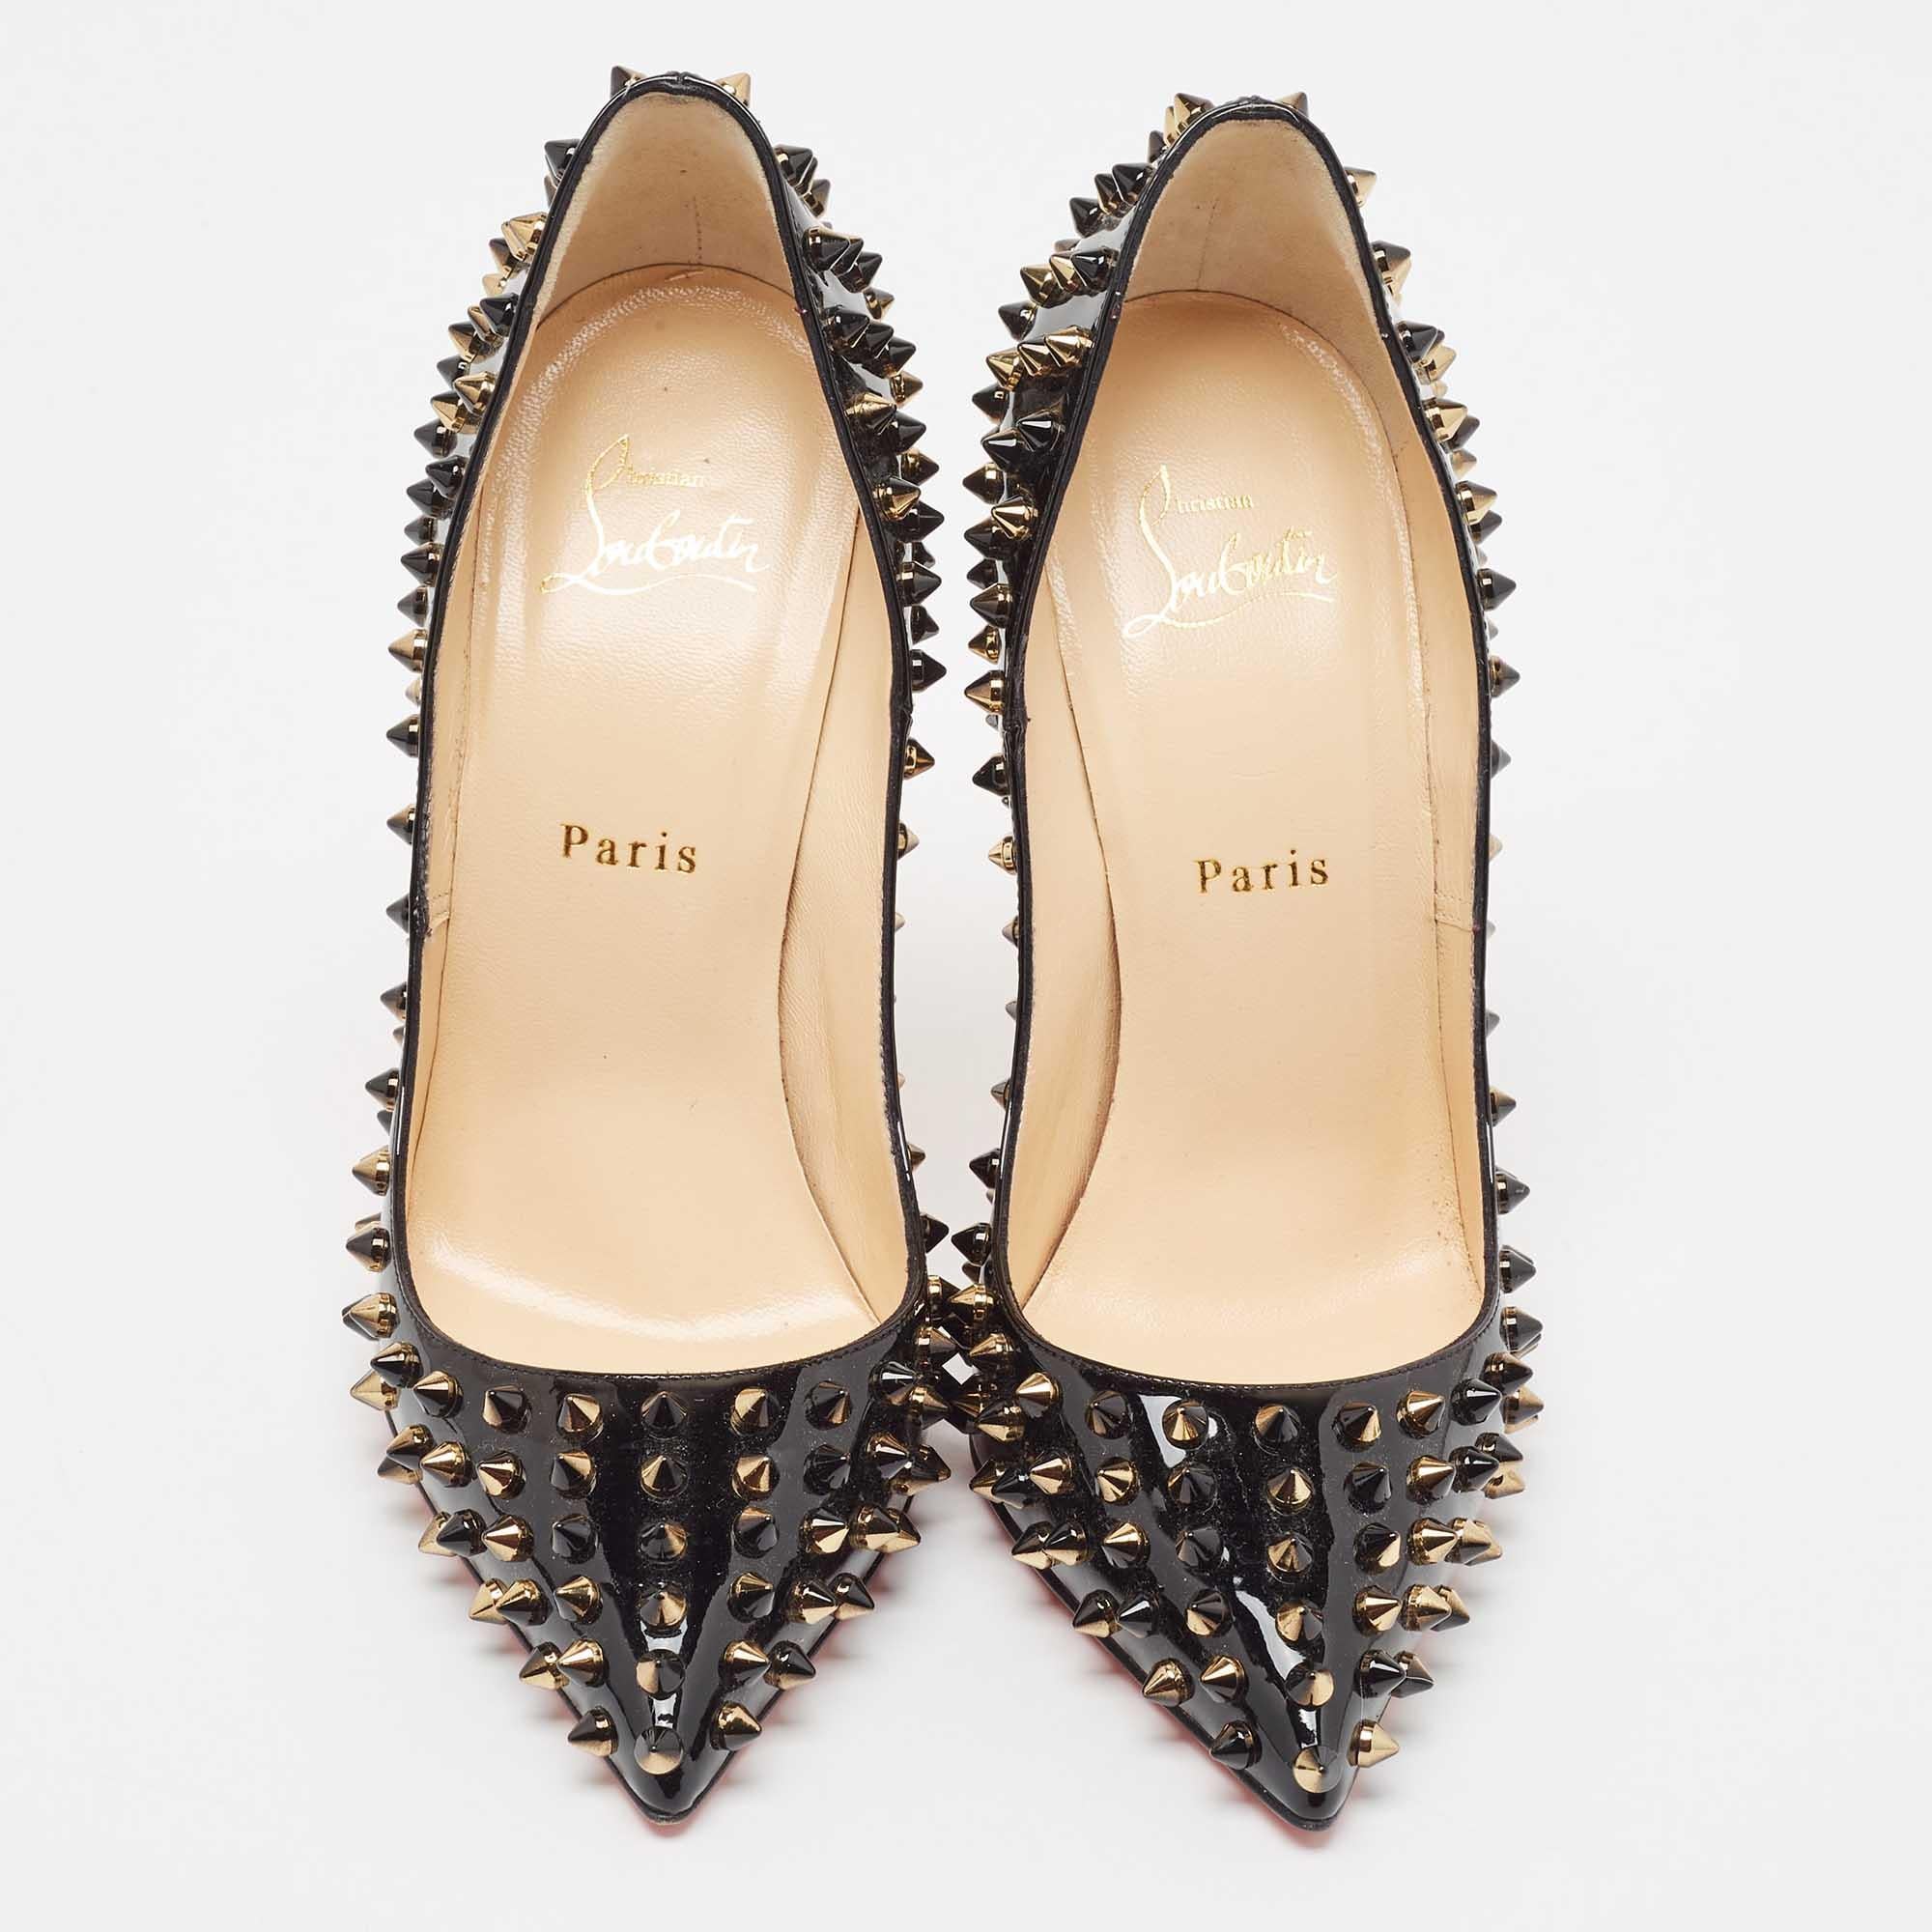 Christian Louboutin Black/Gold Patent Leather Pigalle Spikes Pumps Size 38.5 In Good Condition For Sale In Dubai, Al Qouz 2